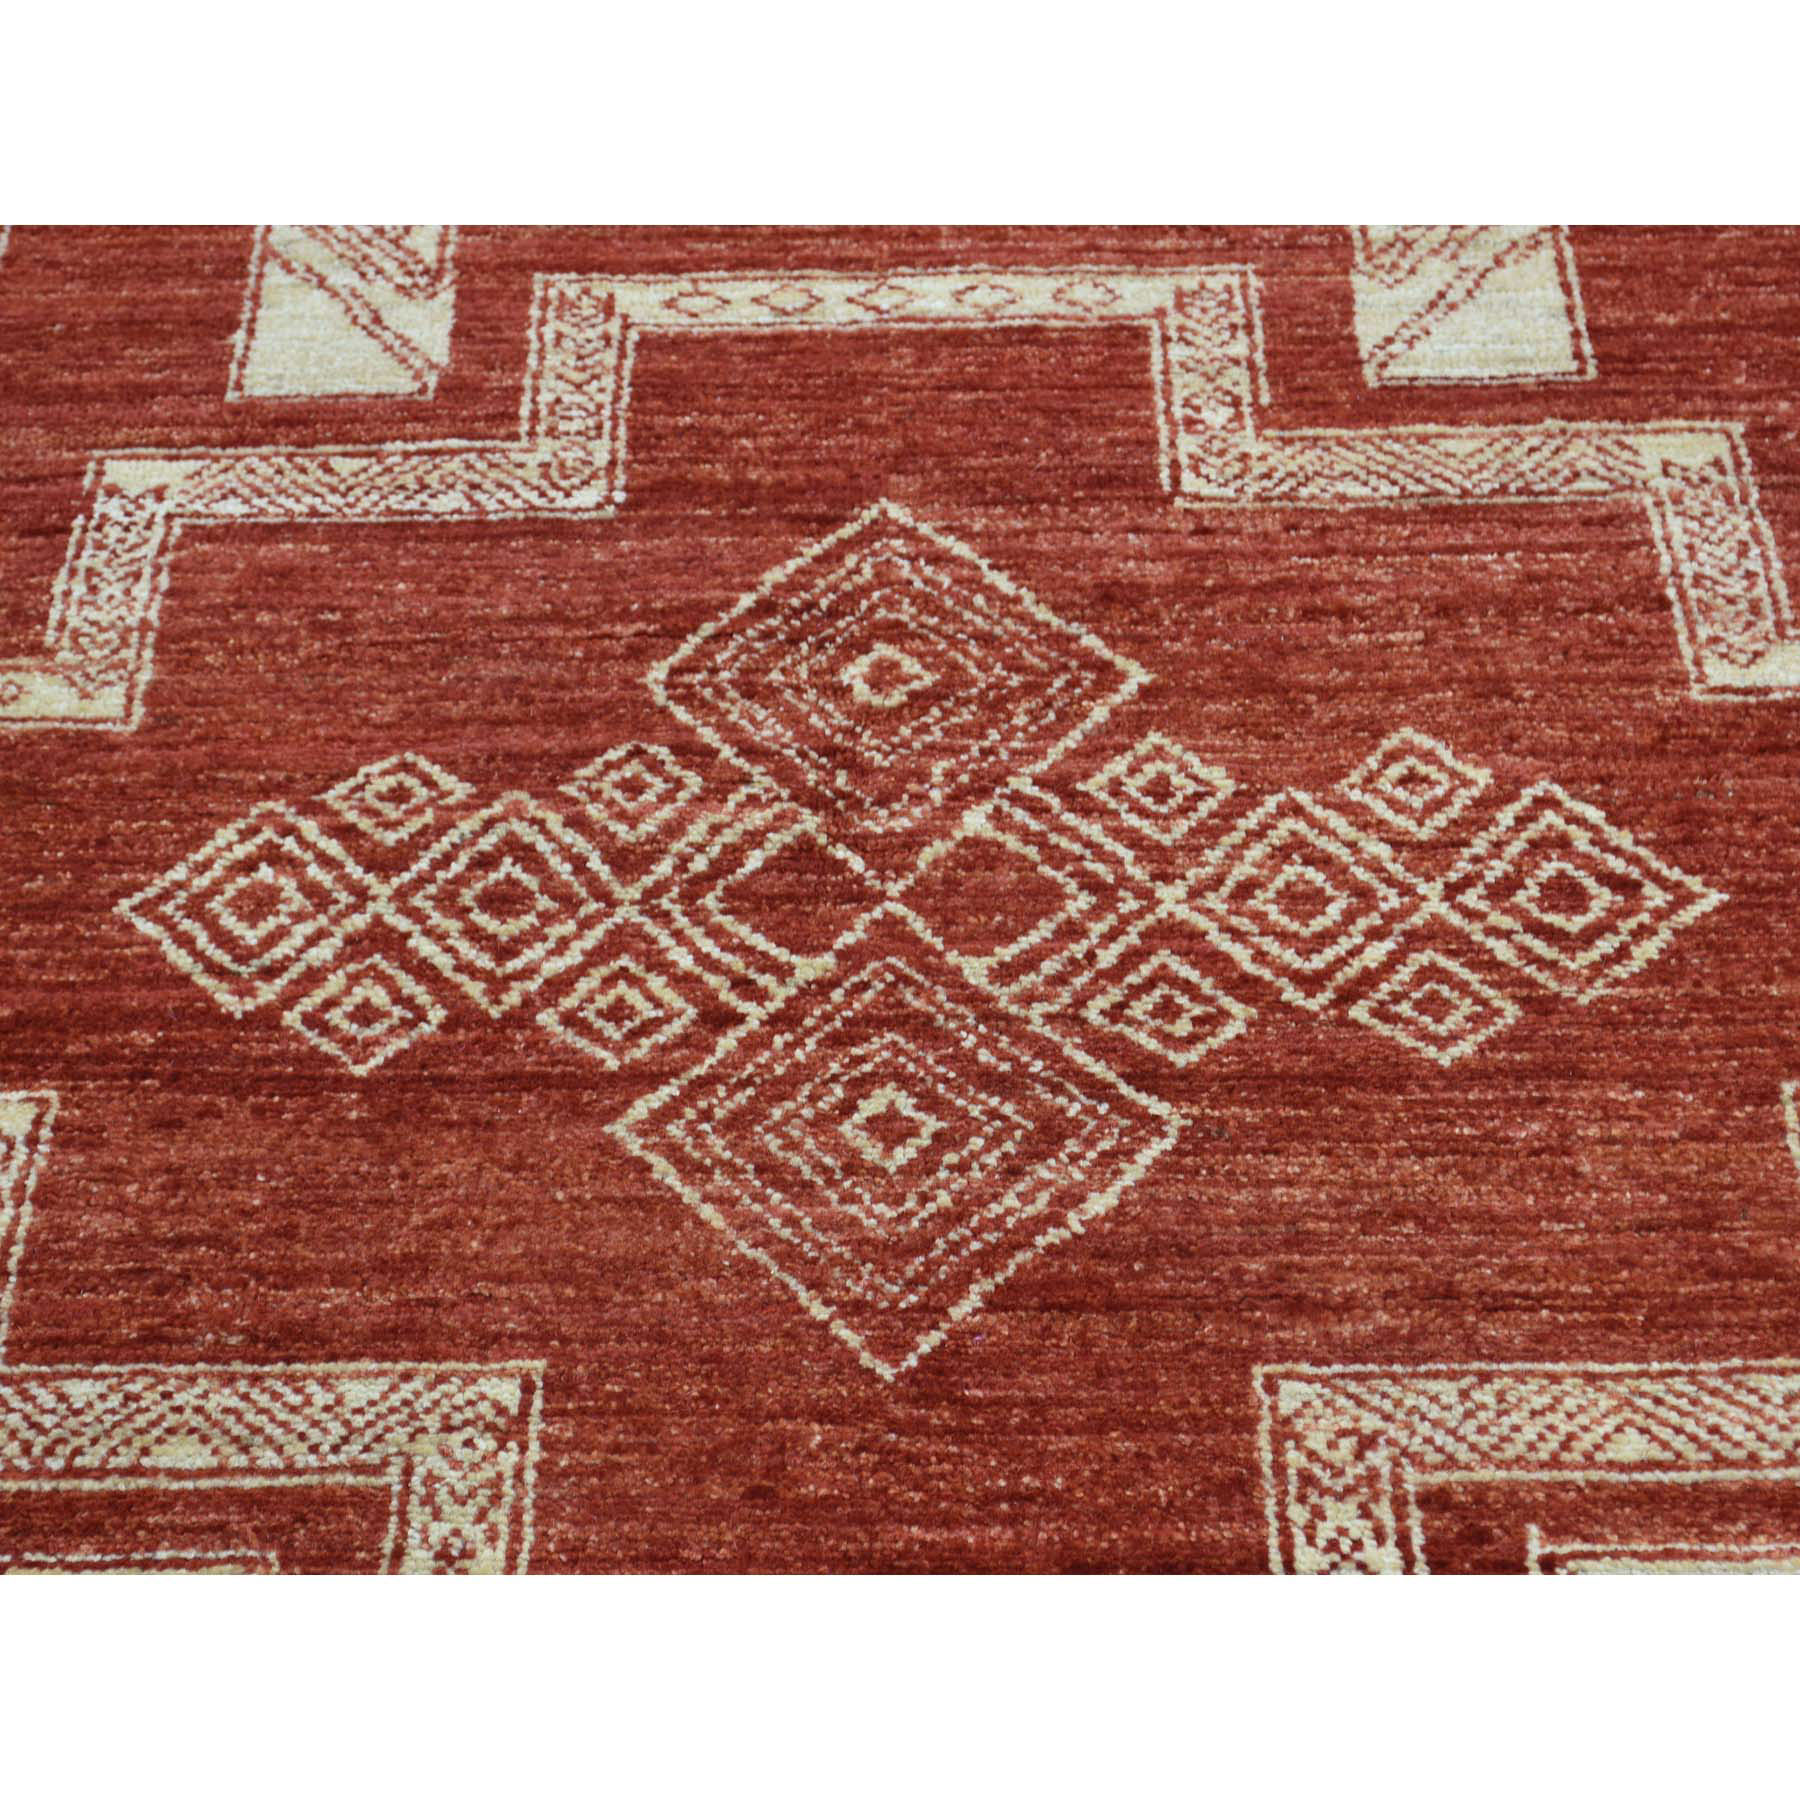 8-1 x10- Pure Wool Hand-Knotted Peshawar with Southwestern Motifs Rug 